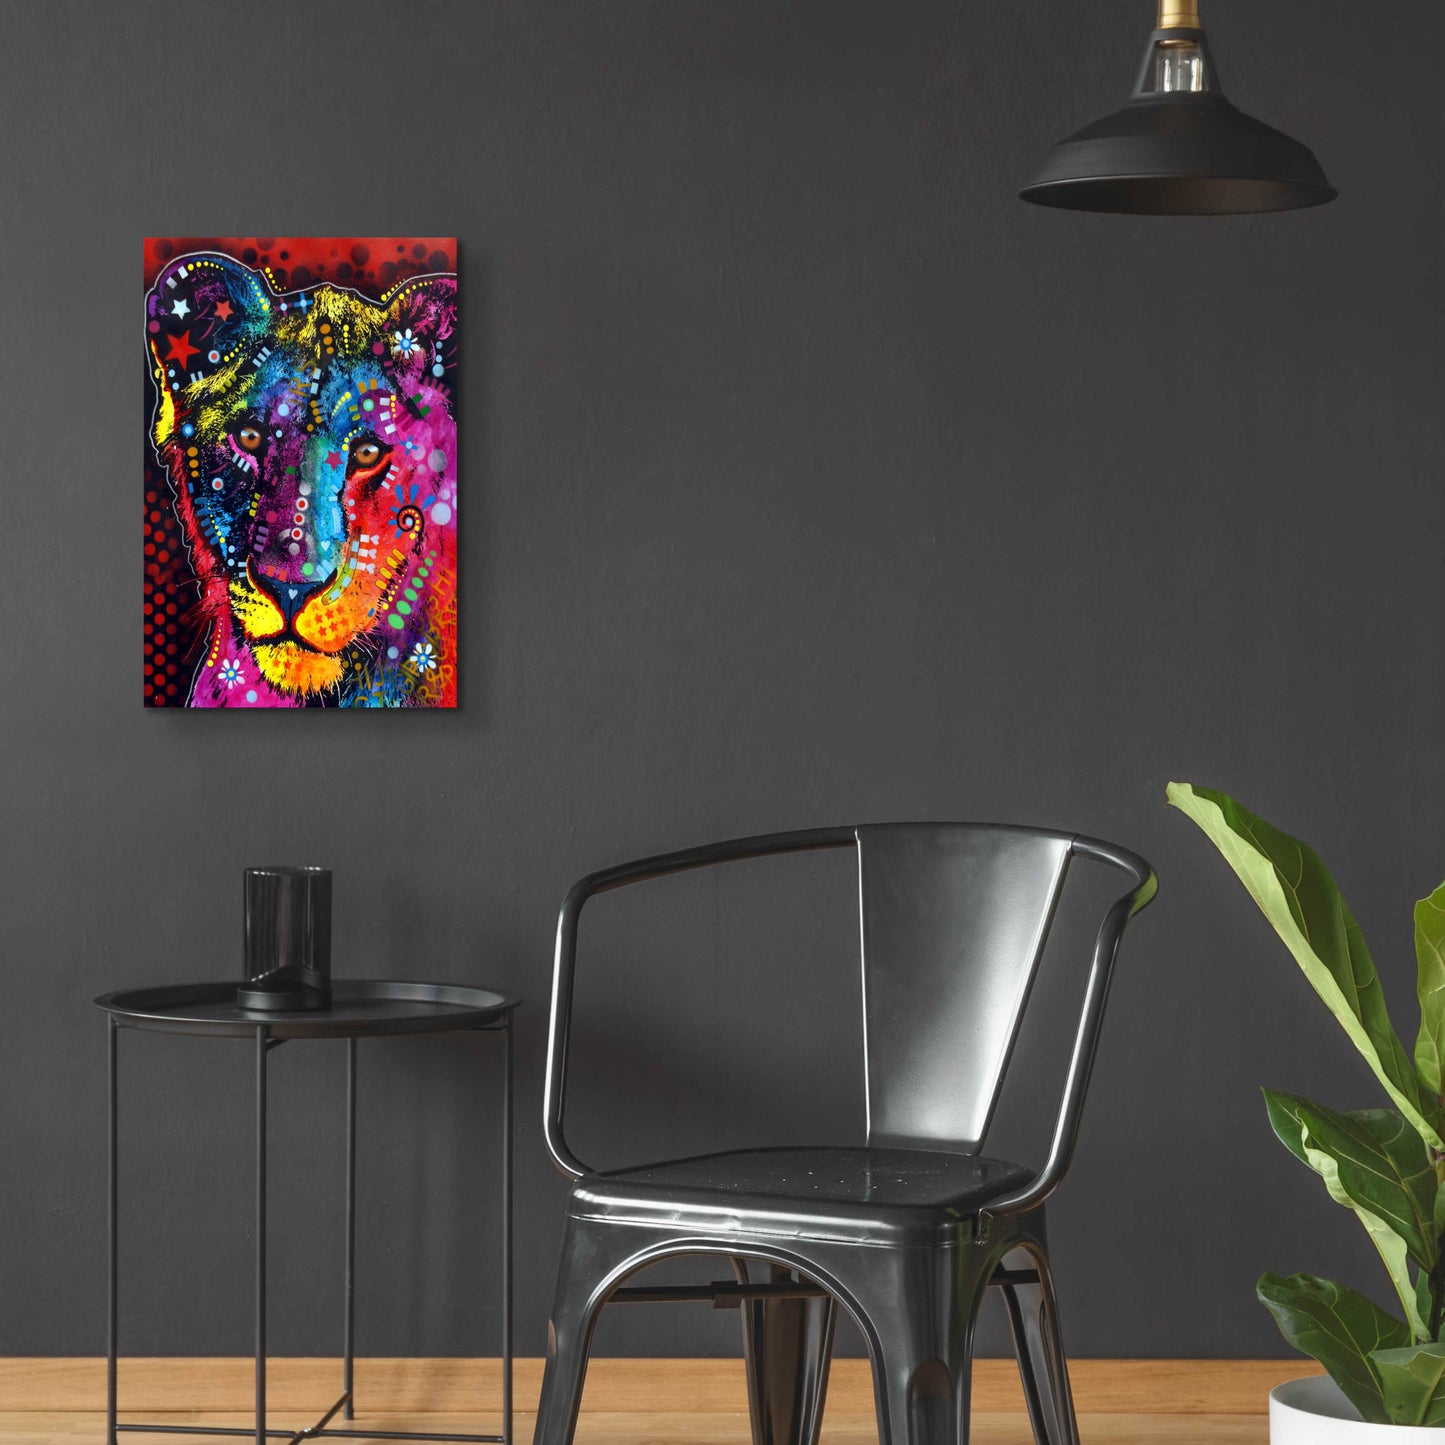 Epic Art 'Young Lion' by Dean Russo, Acrylic Glass Wall Art,16x24